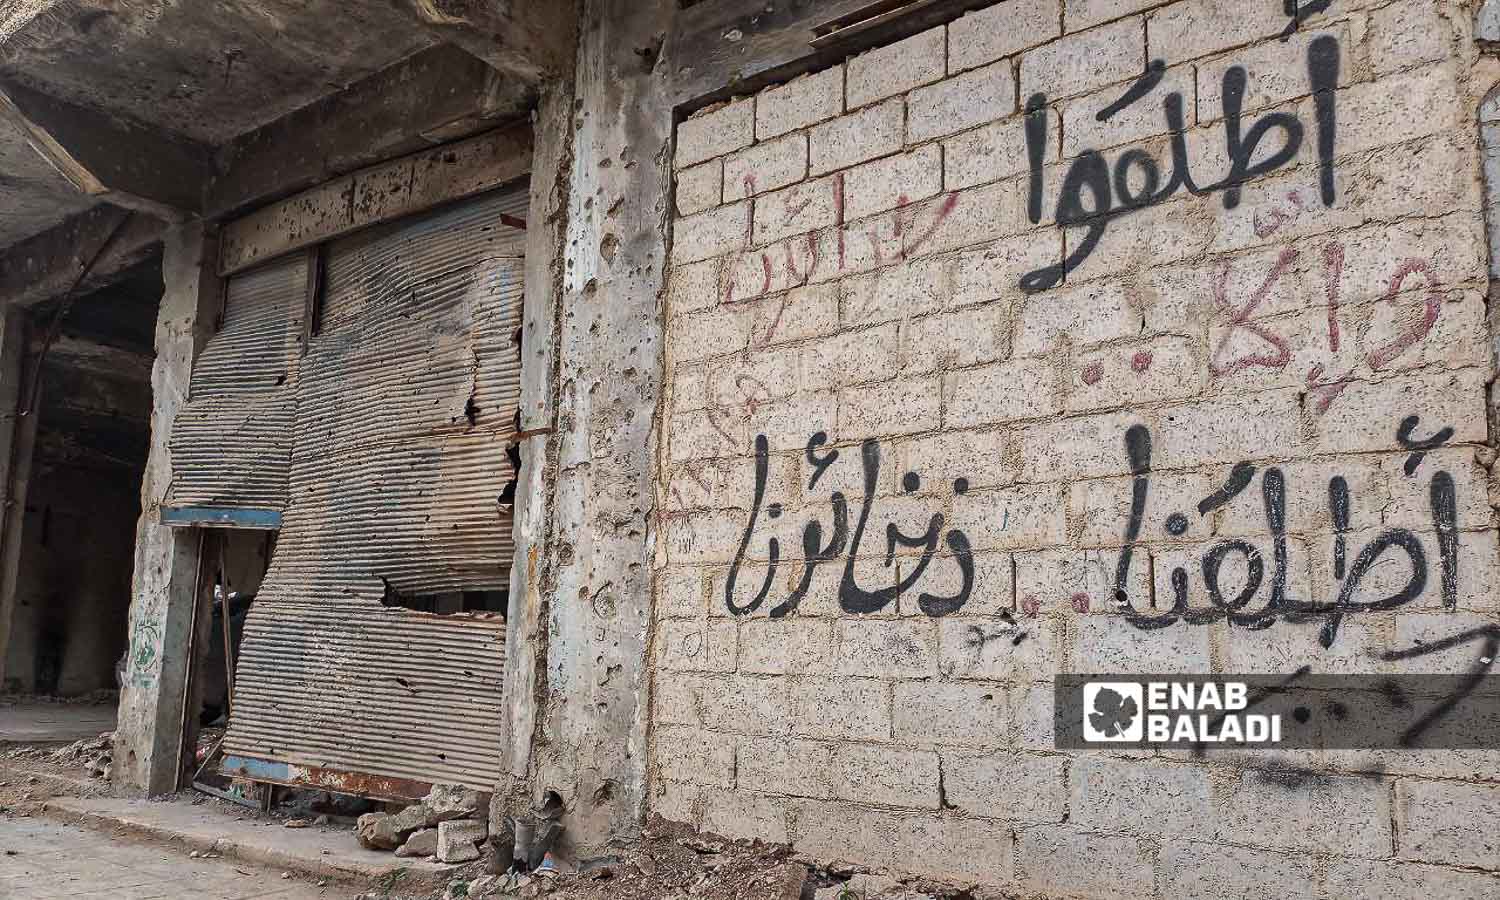 "Release our women, or we'll release our bullets" – a phrase written on a destroyed wall in Daraa al-Mahatta – March 17, 2024 (Enab Baladi/Sarah al-Ahmad)